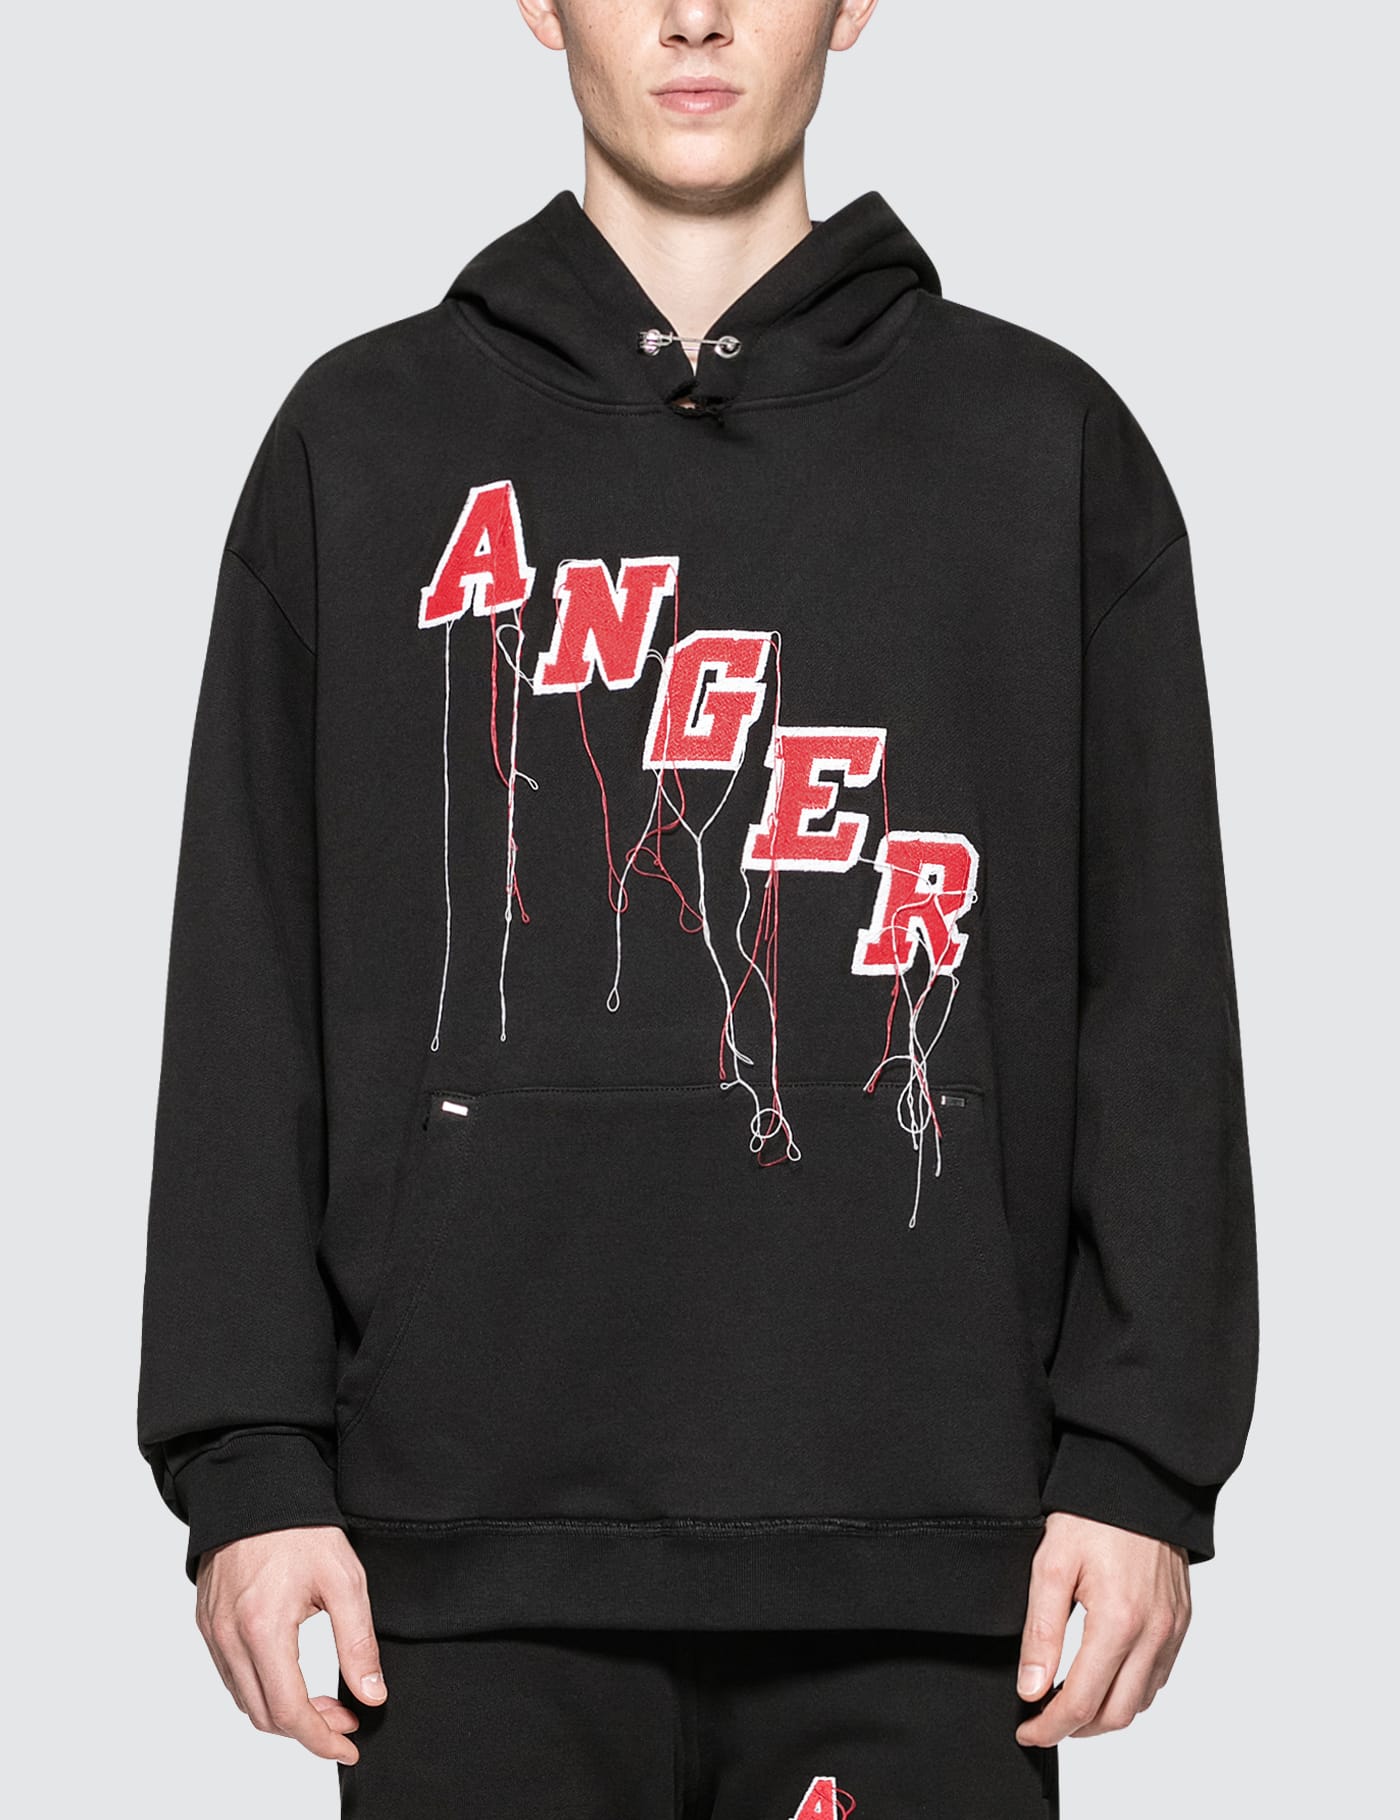 Mr. Completely - Anger Factory Hoodie | HBX - Globally Curated